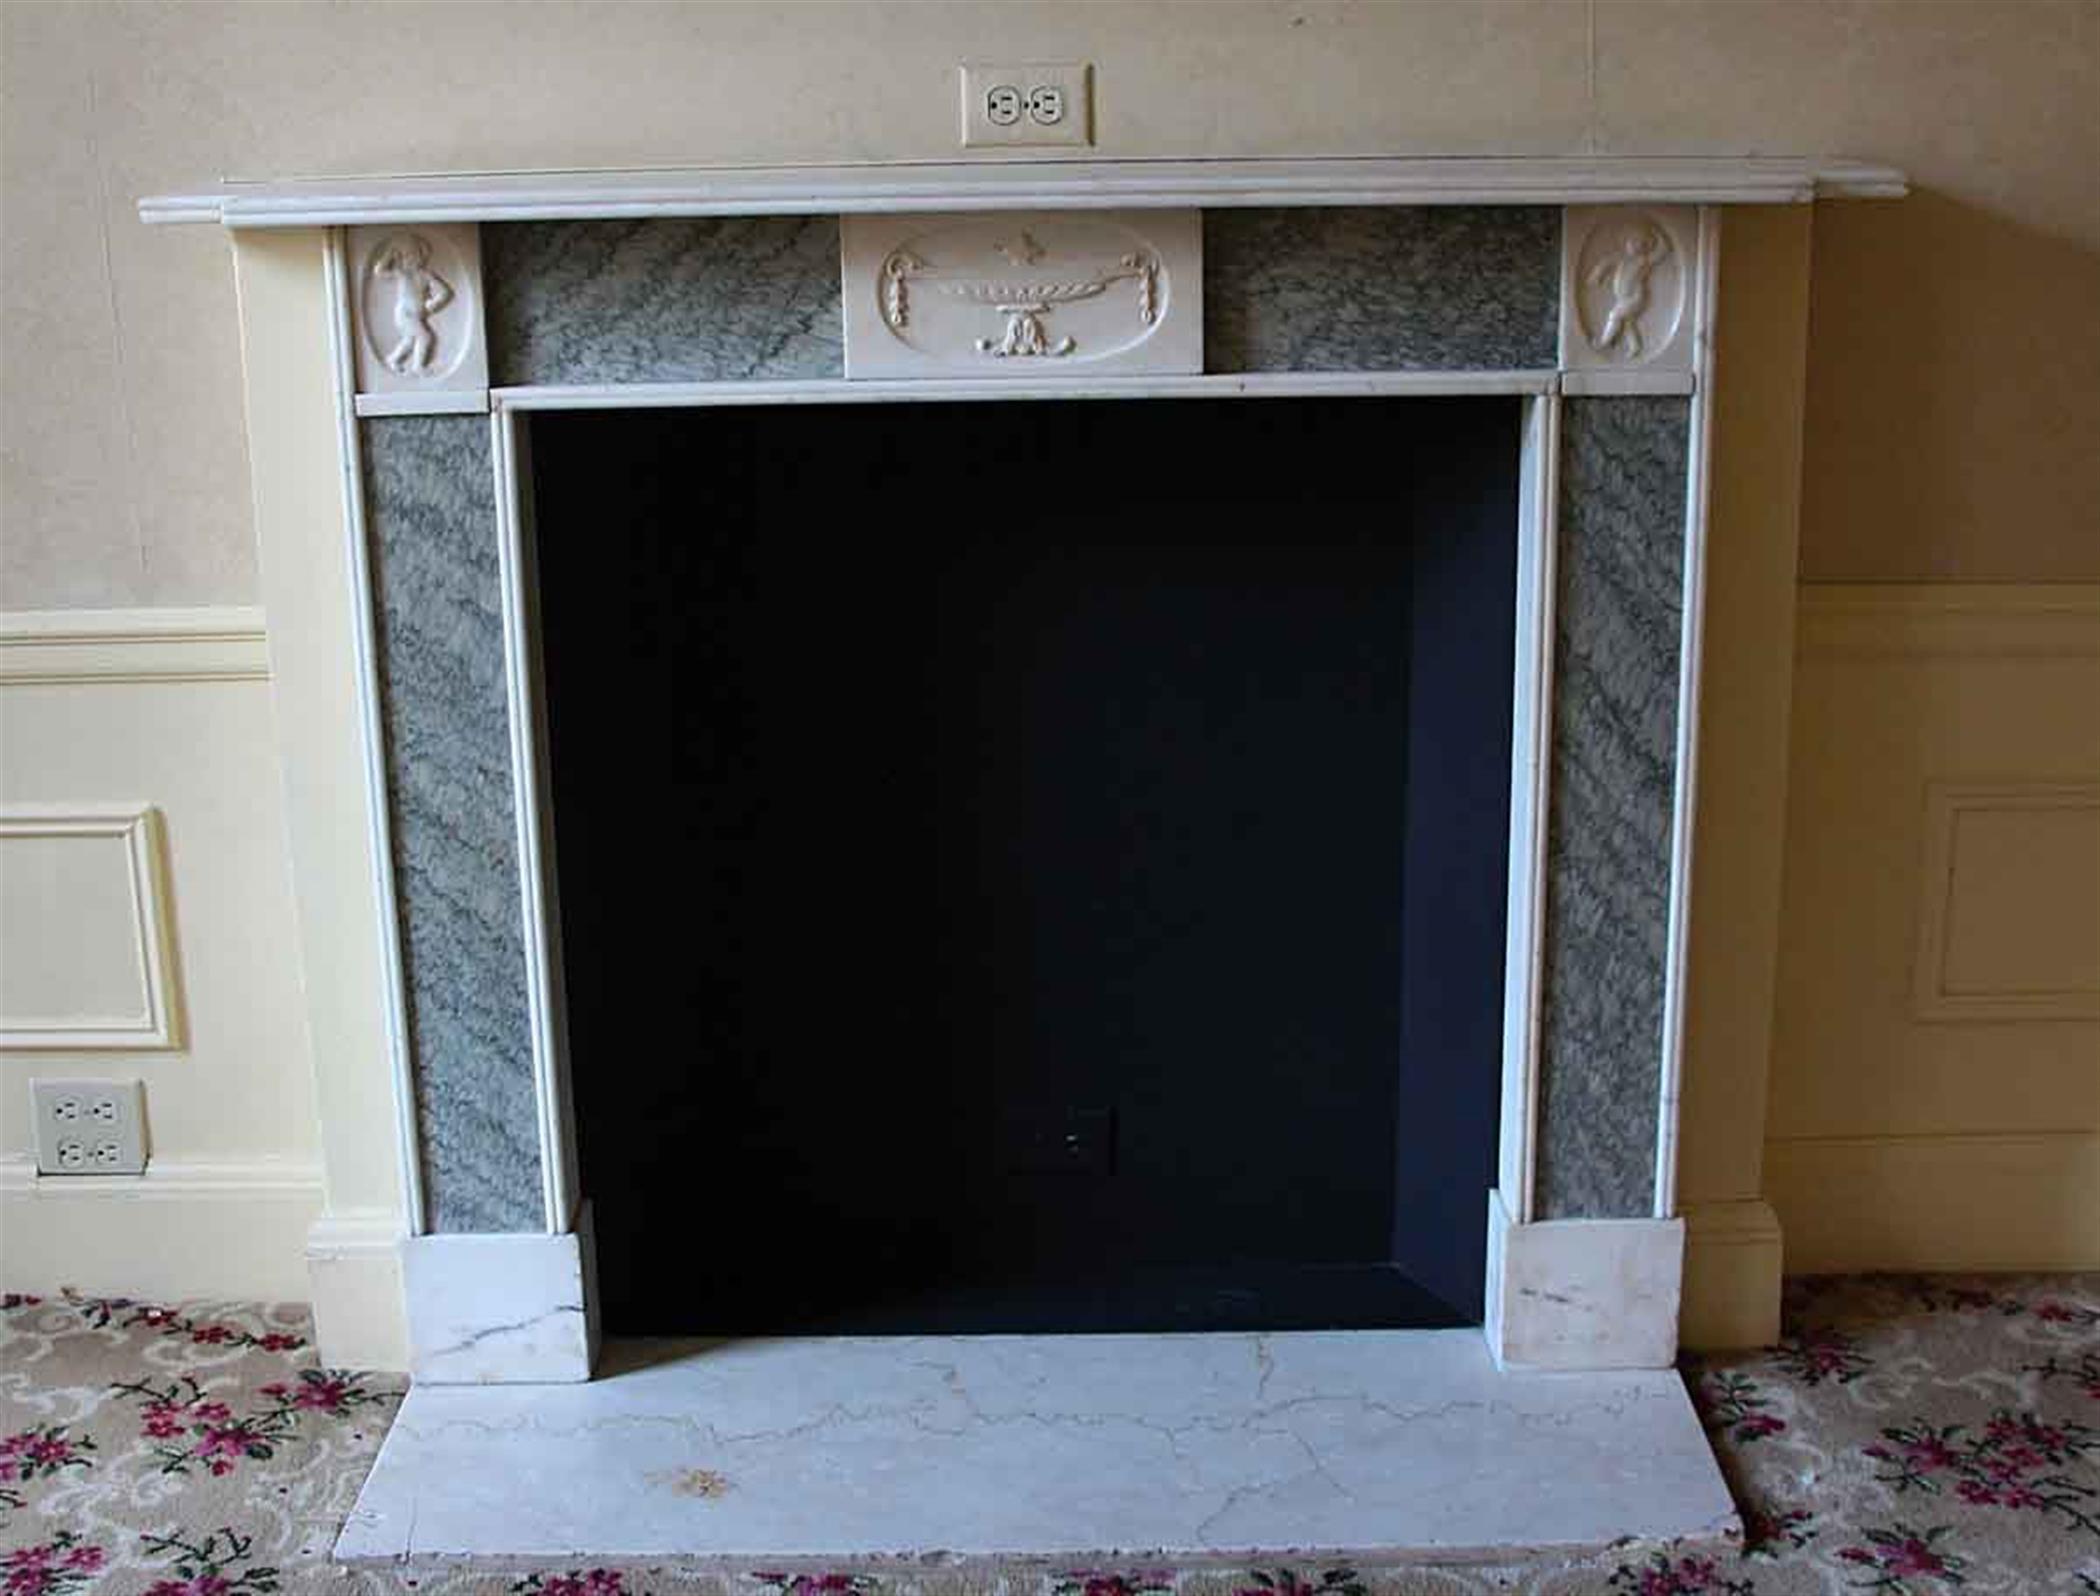 Hearth nor included. Imported from France and installed at the 1931 NYC Waldorf Astoria Hotel on Park Ave. Original to suite 15V of the hotel. 19th century petite Georgian style statuary white and green marble mantel featuring cherubs on the top two